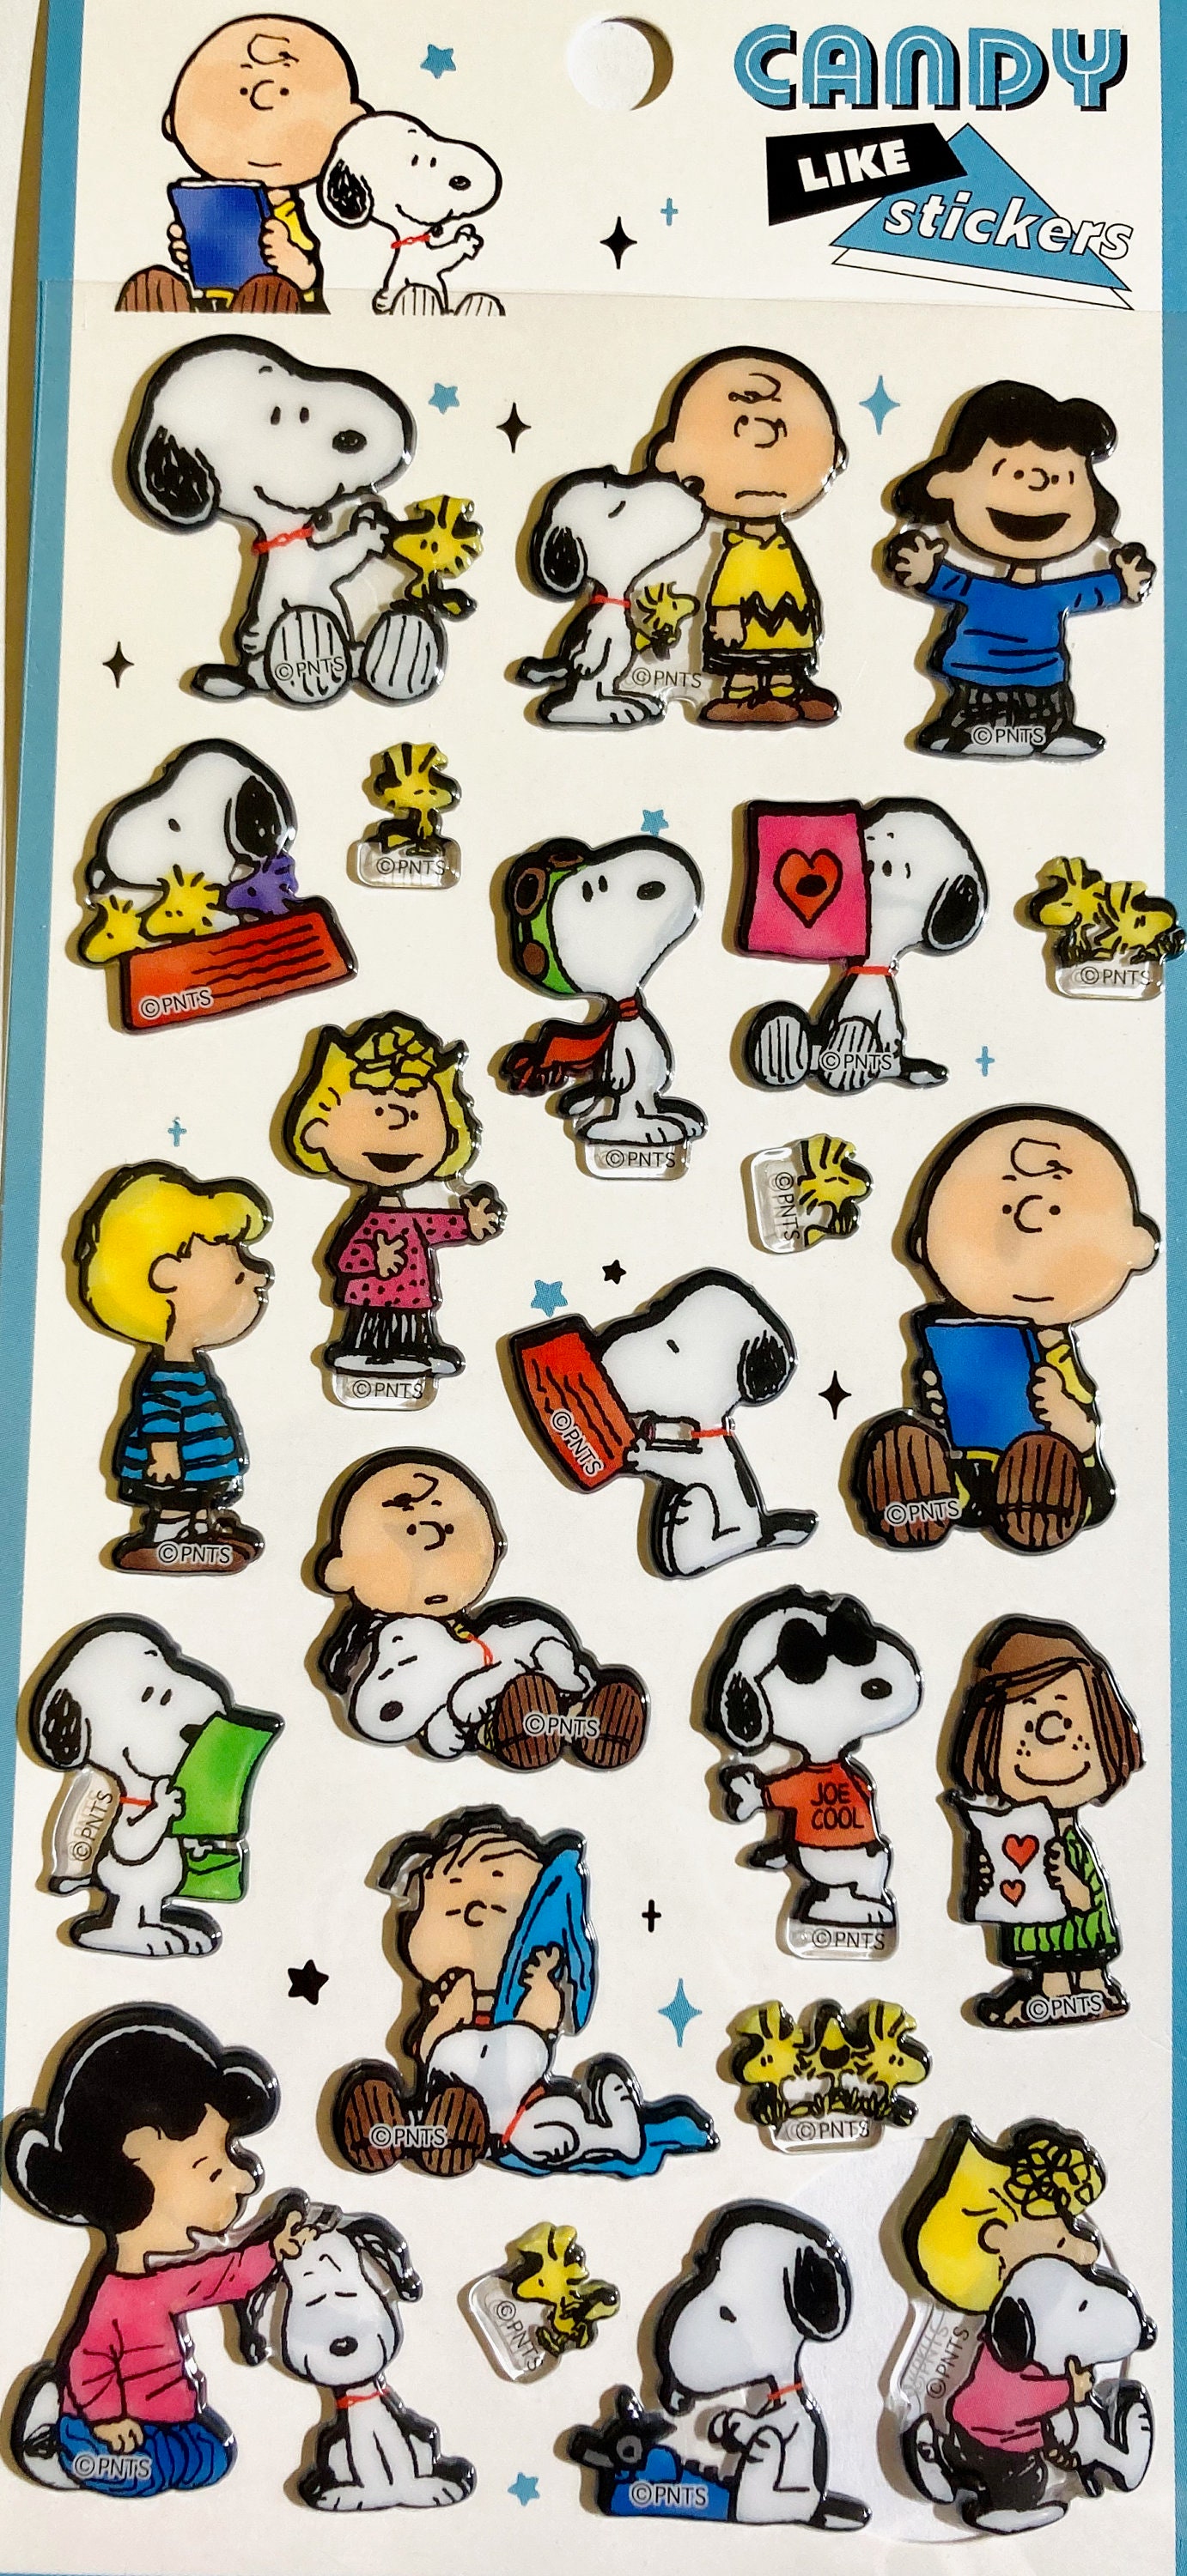 Snoopy/peanuts Candy Like Stickers, the Peanuts Gang Happy Mail